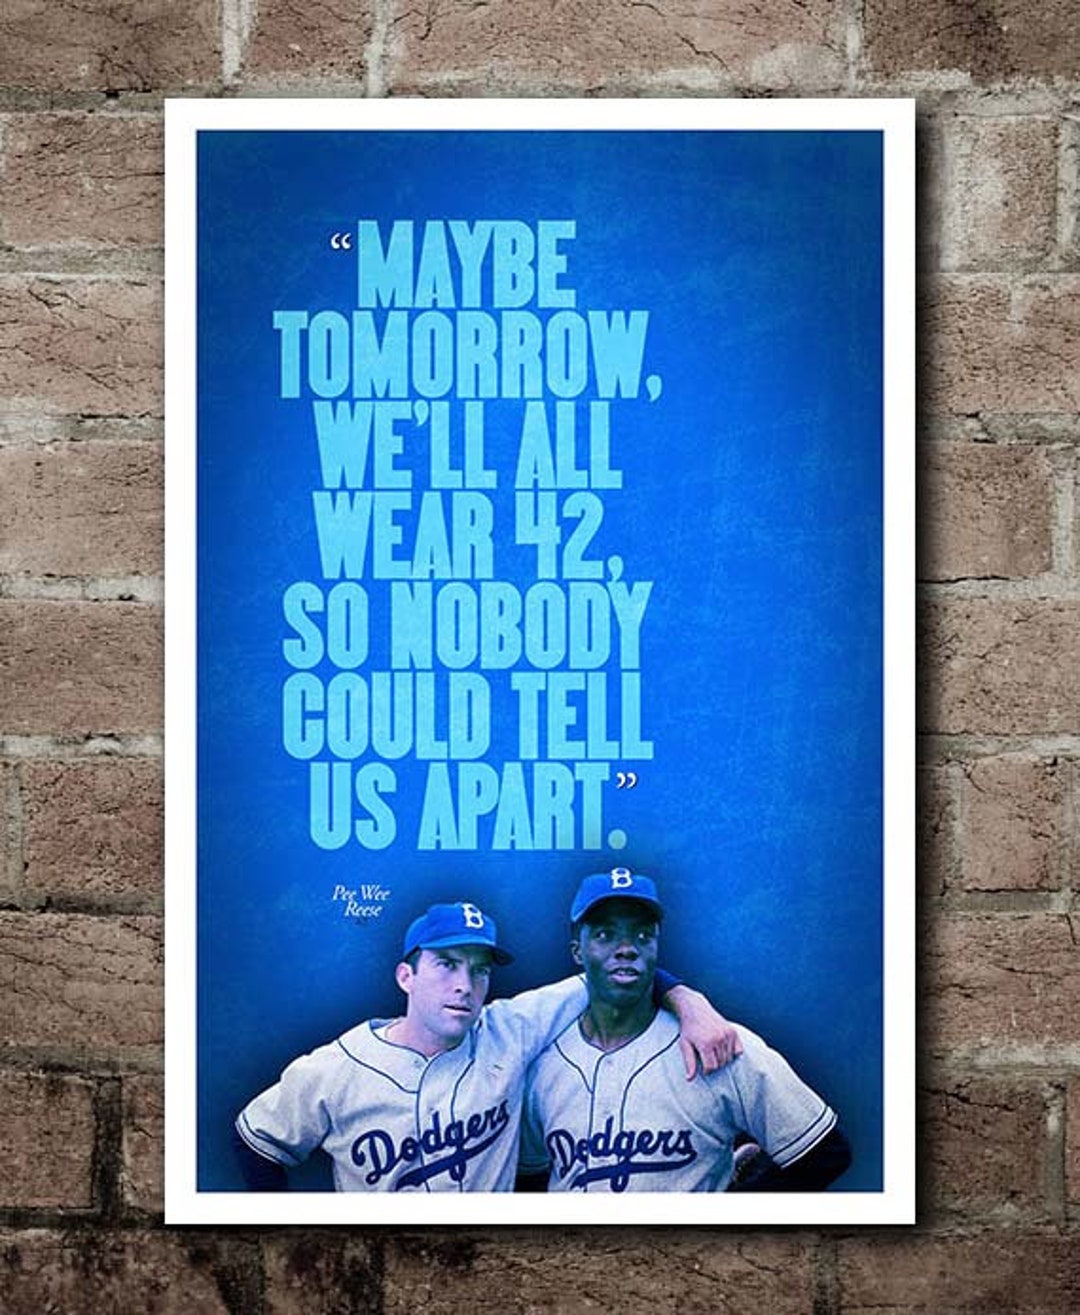 42 all WEAR 42 Pee Wee Reese Quote Poster -  Denmark